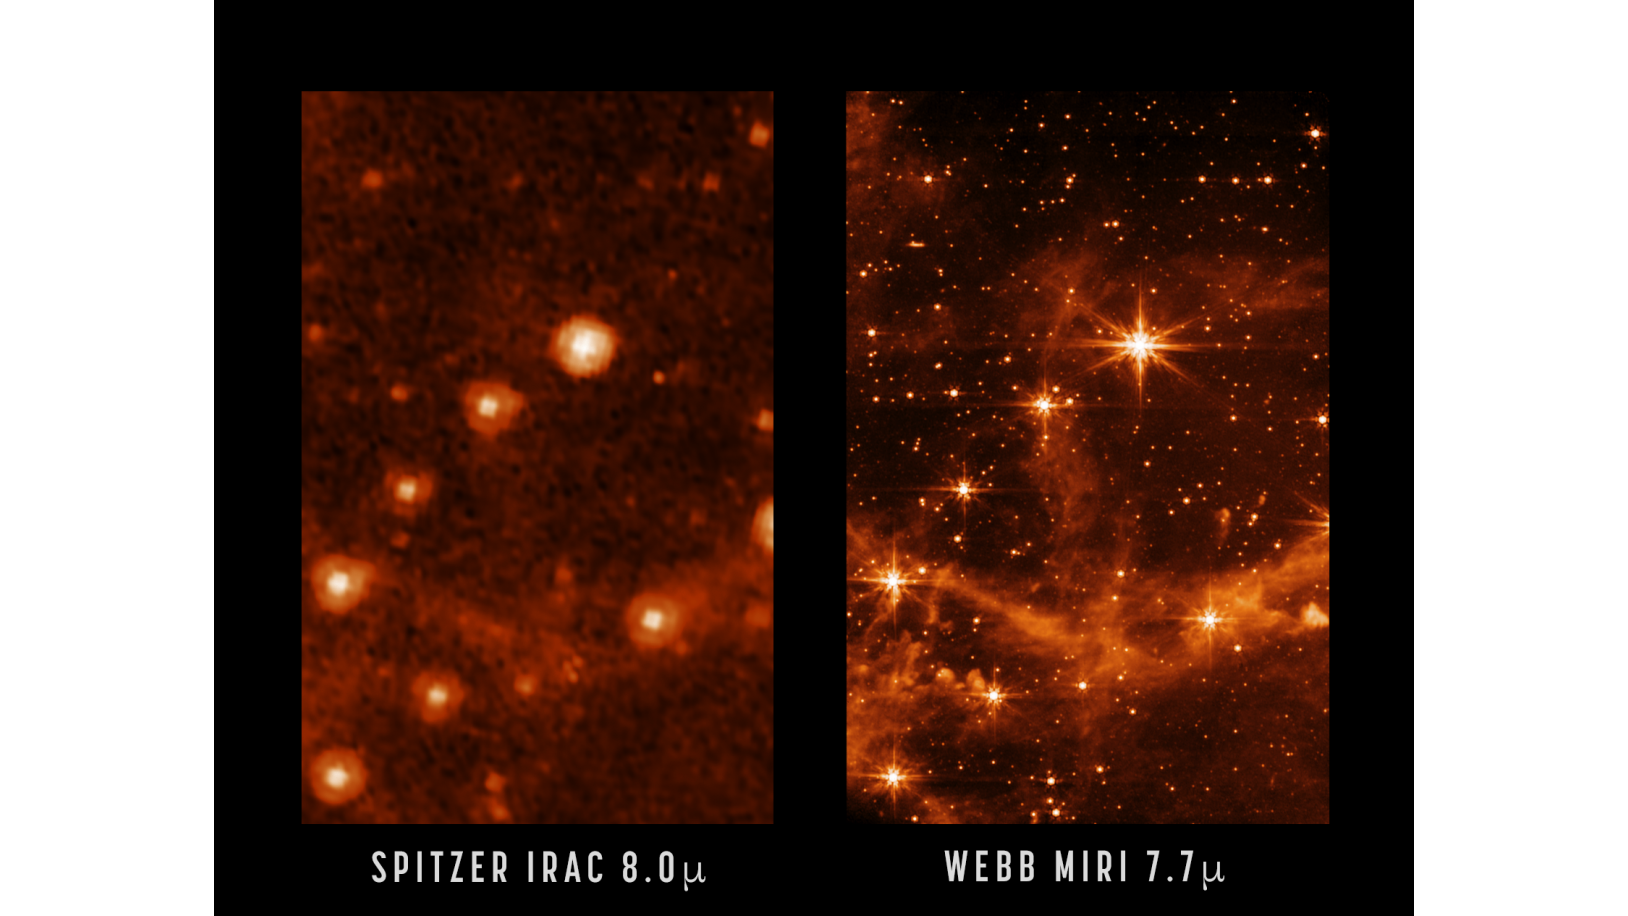 A comparison of views of the same part of the sky as seen by NASA's retired Spitzer Space Telescope and the recently launched James Webb Space Telescope.